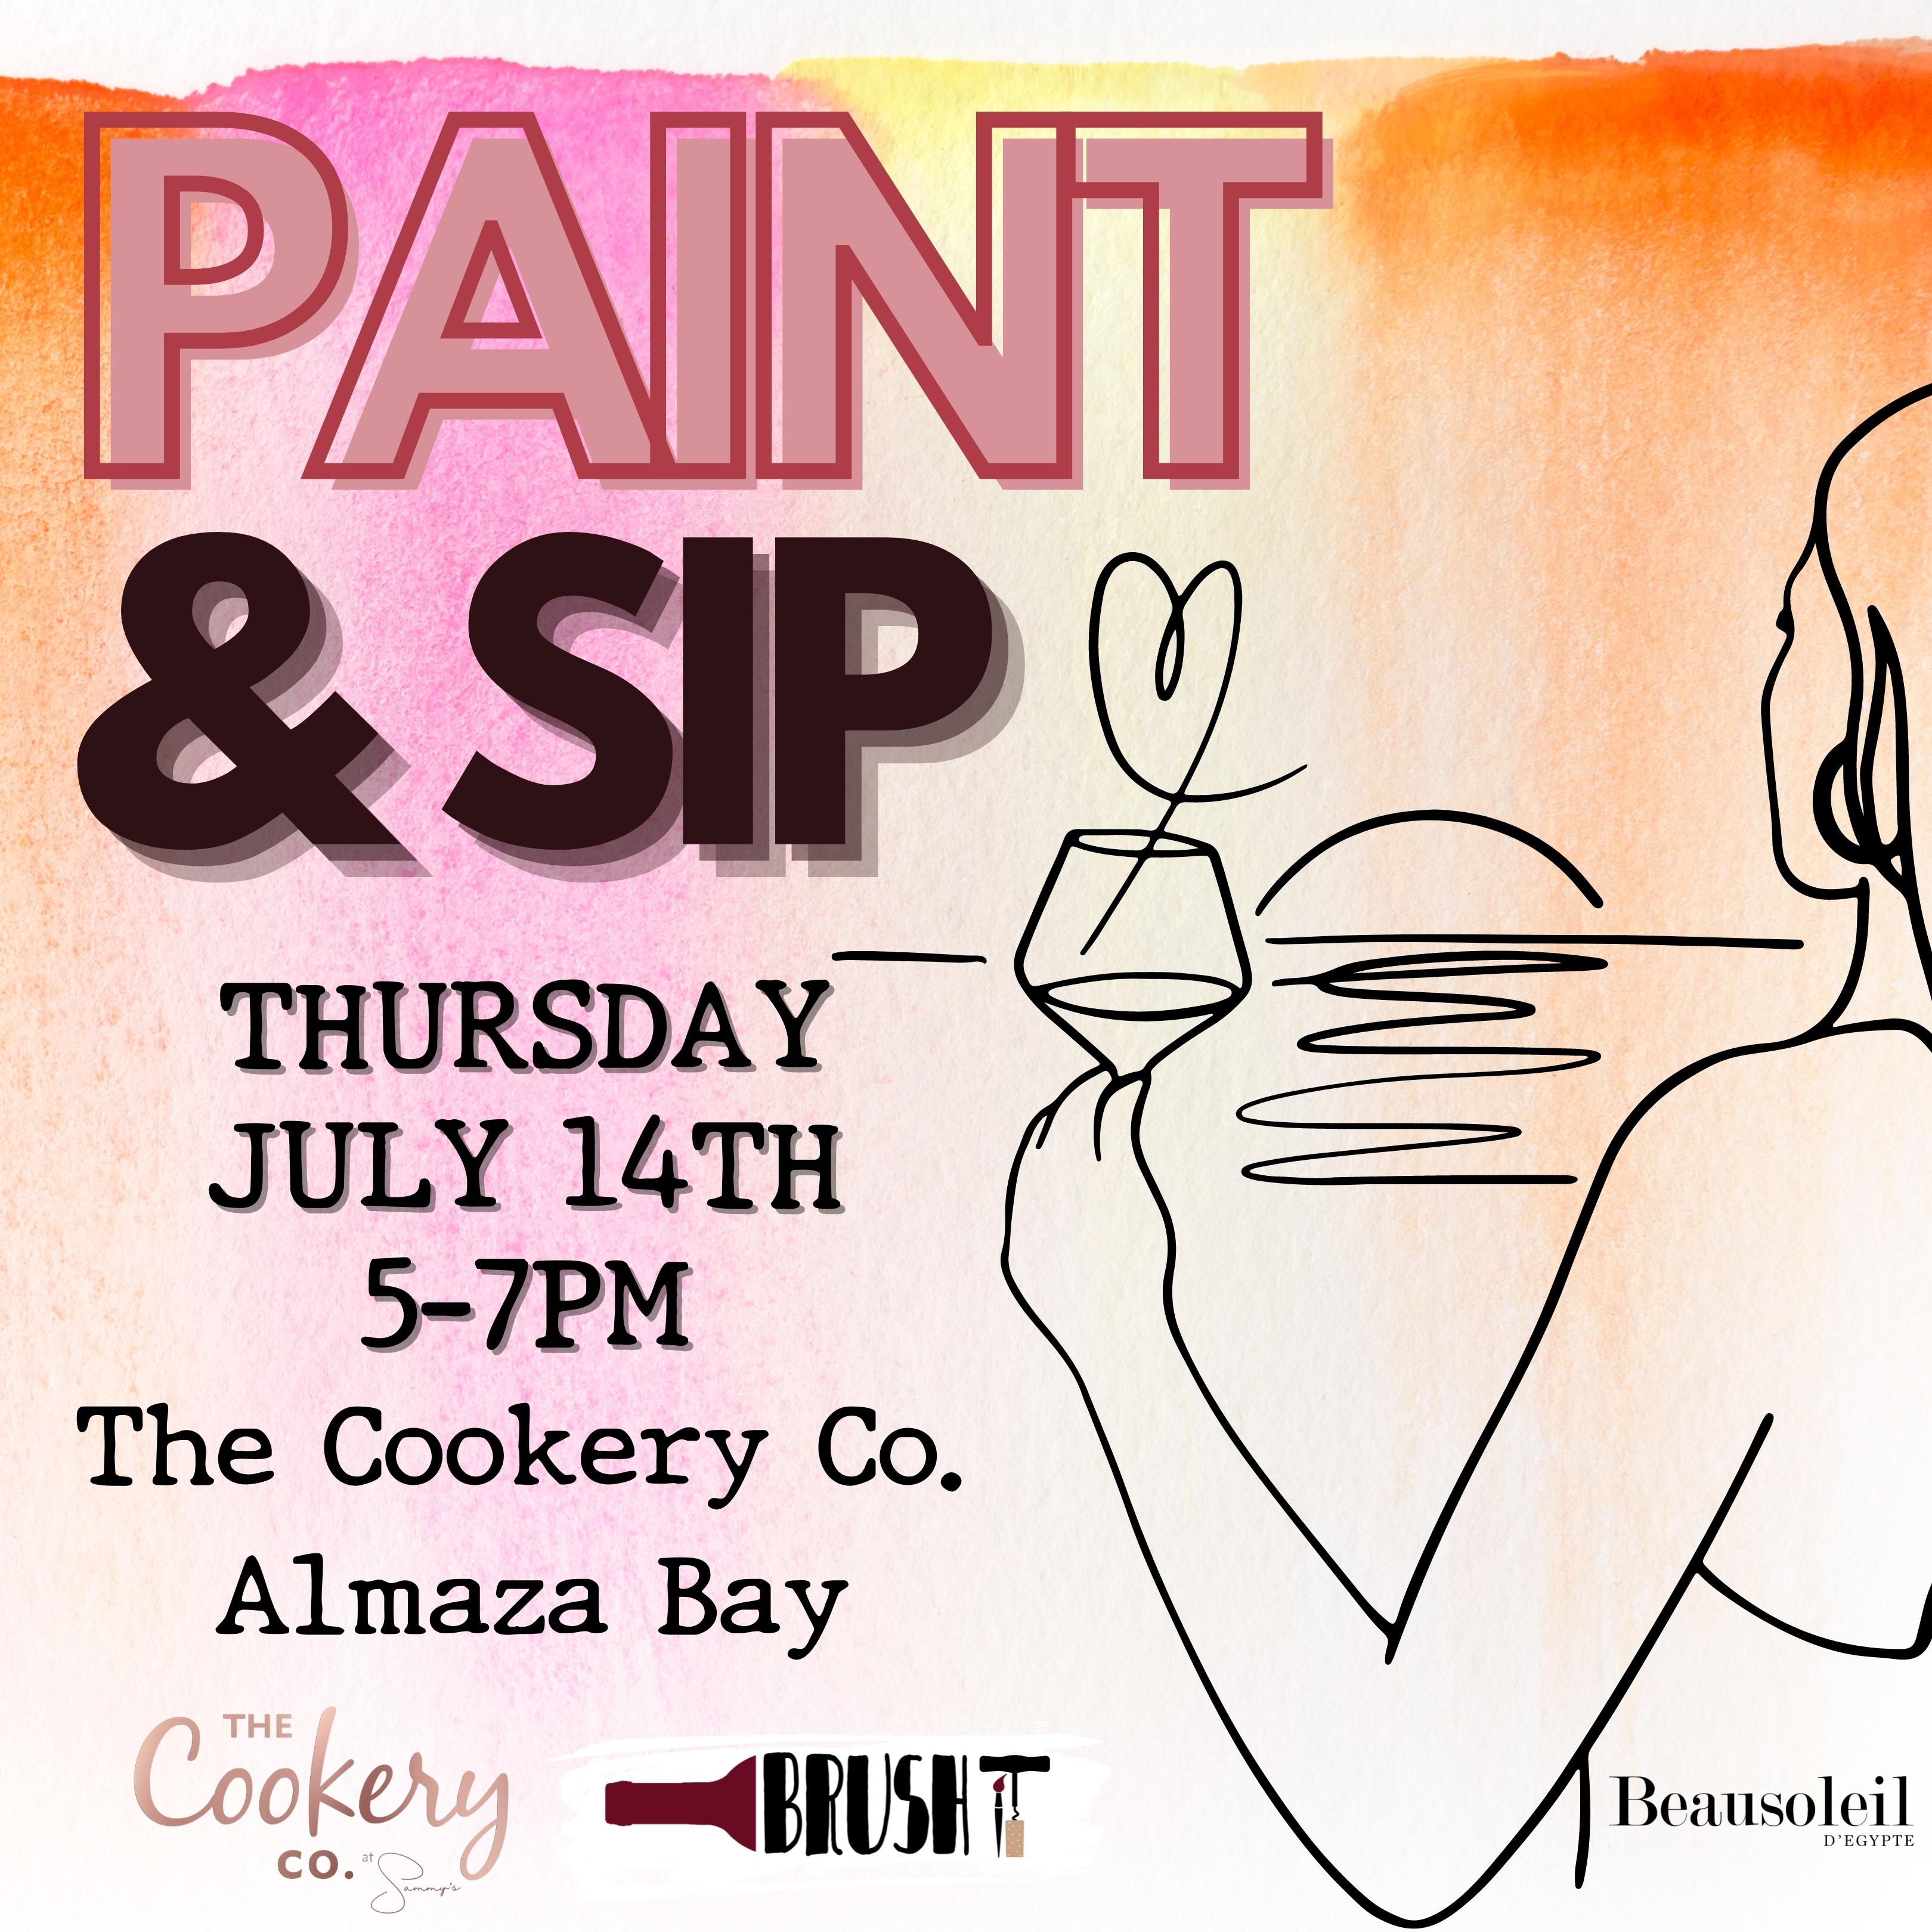 THURSDAY, July 14th - 5:00 pm - 7:00 pm - THE COOKERY CO - BY THE BEACH - ALMAZA BAY